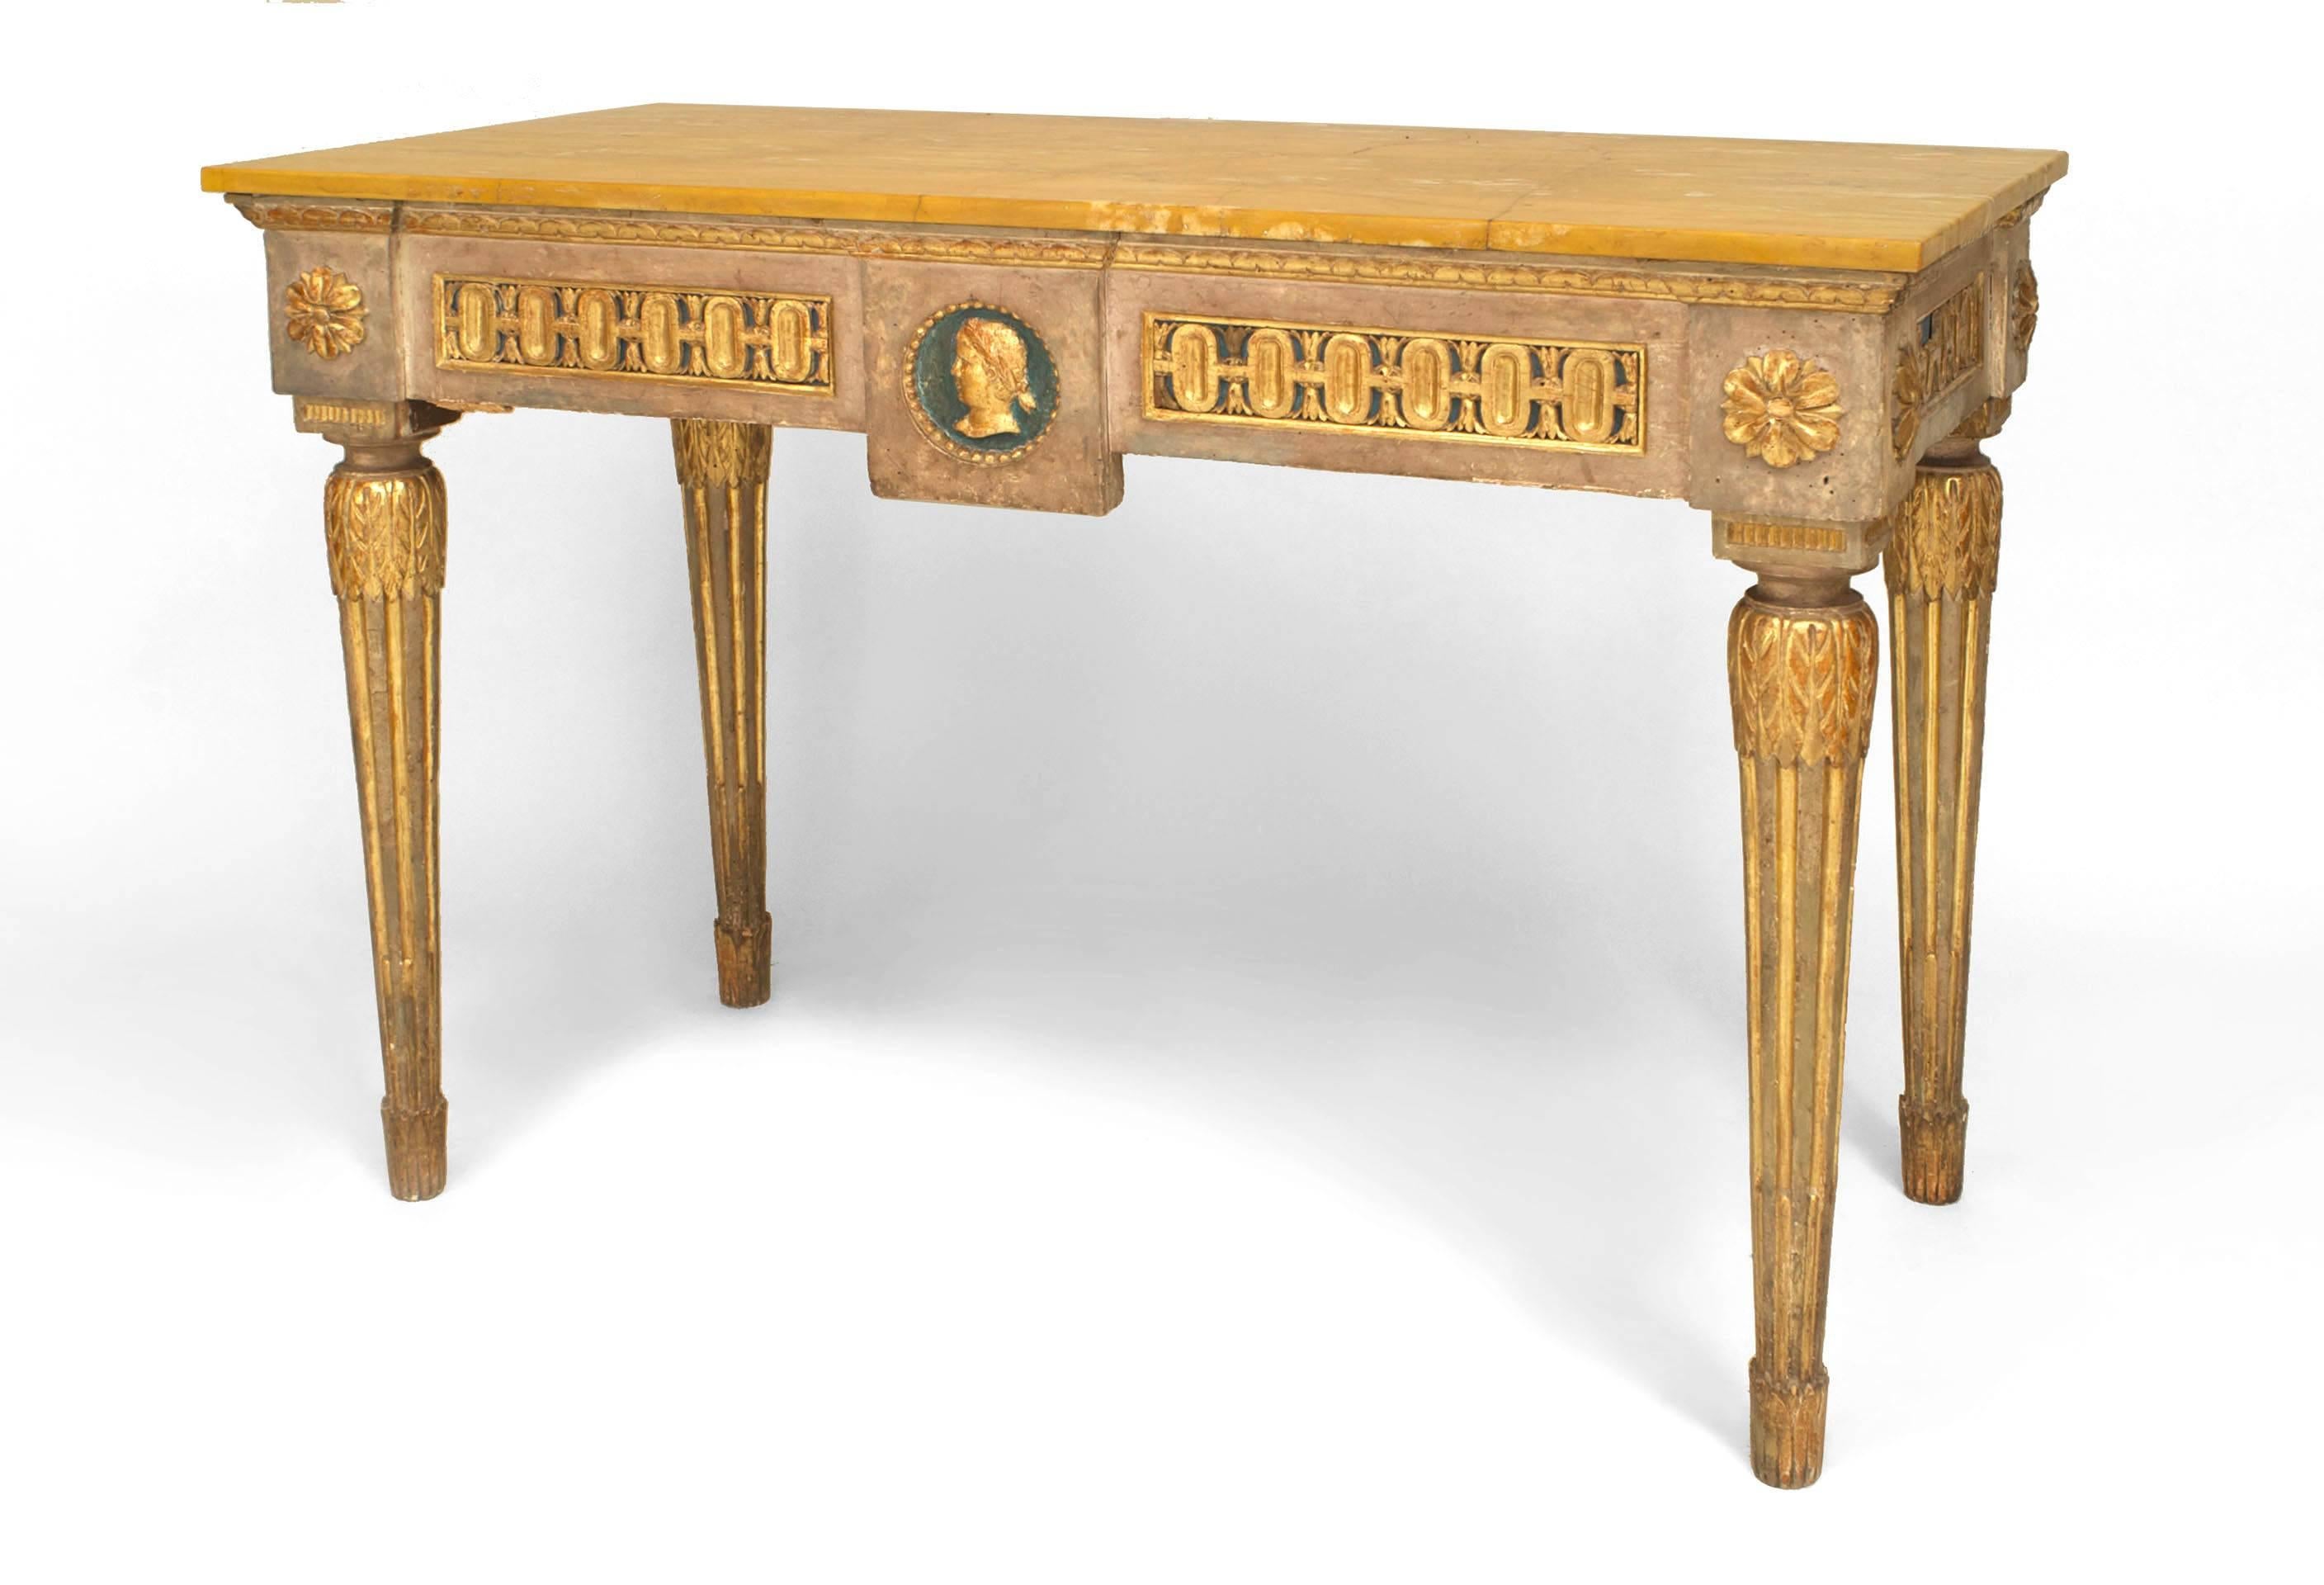 Italian Neo-classic (Late 18th Century) grey painted & parcel gilt trimmed console table with a centered head in relief on the apron supporting a breche arquelino veneered marble top all on four fluted legs.
